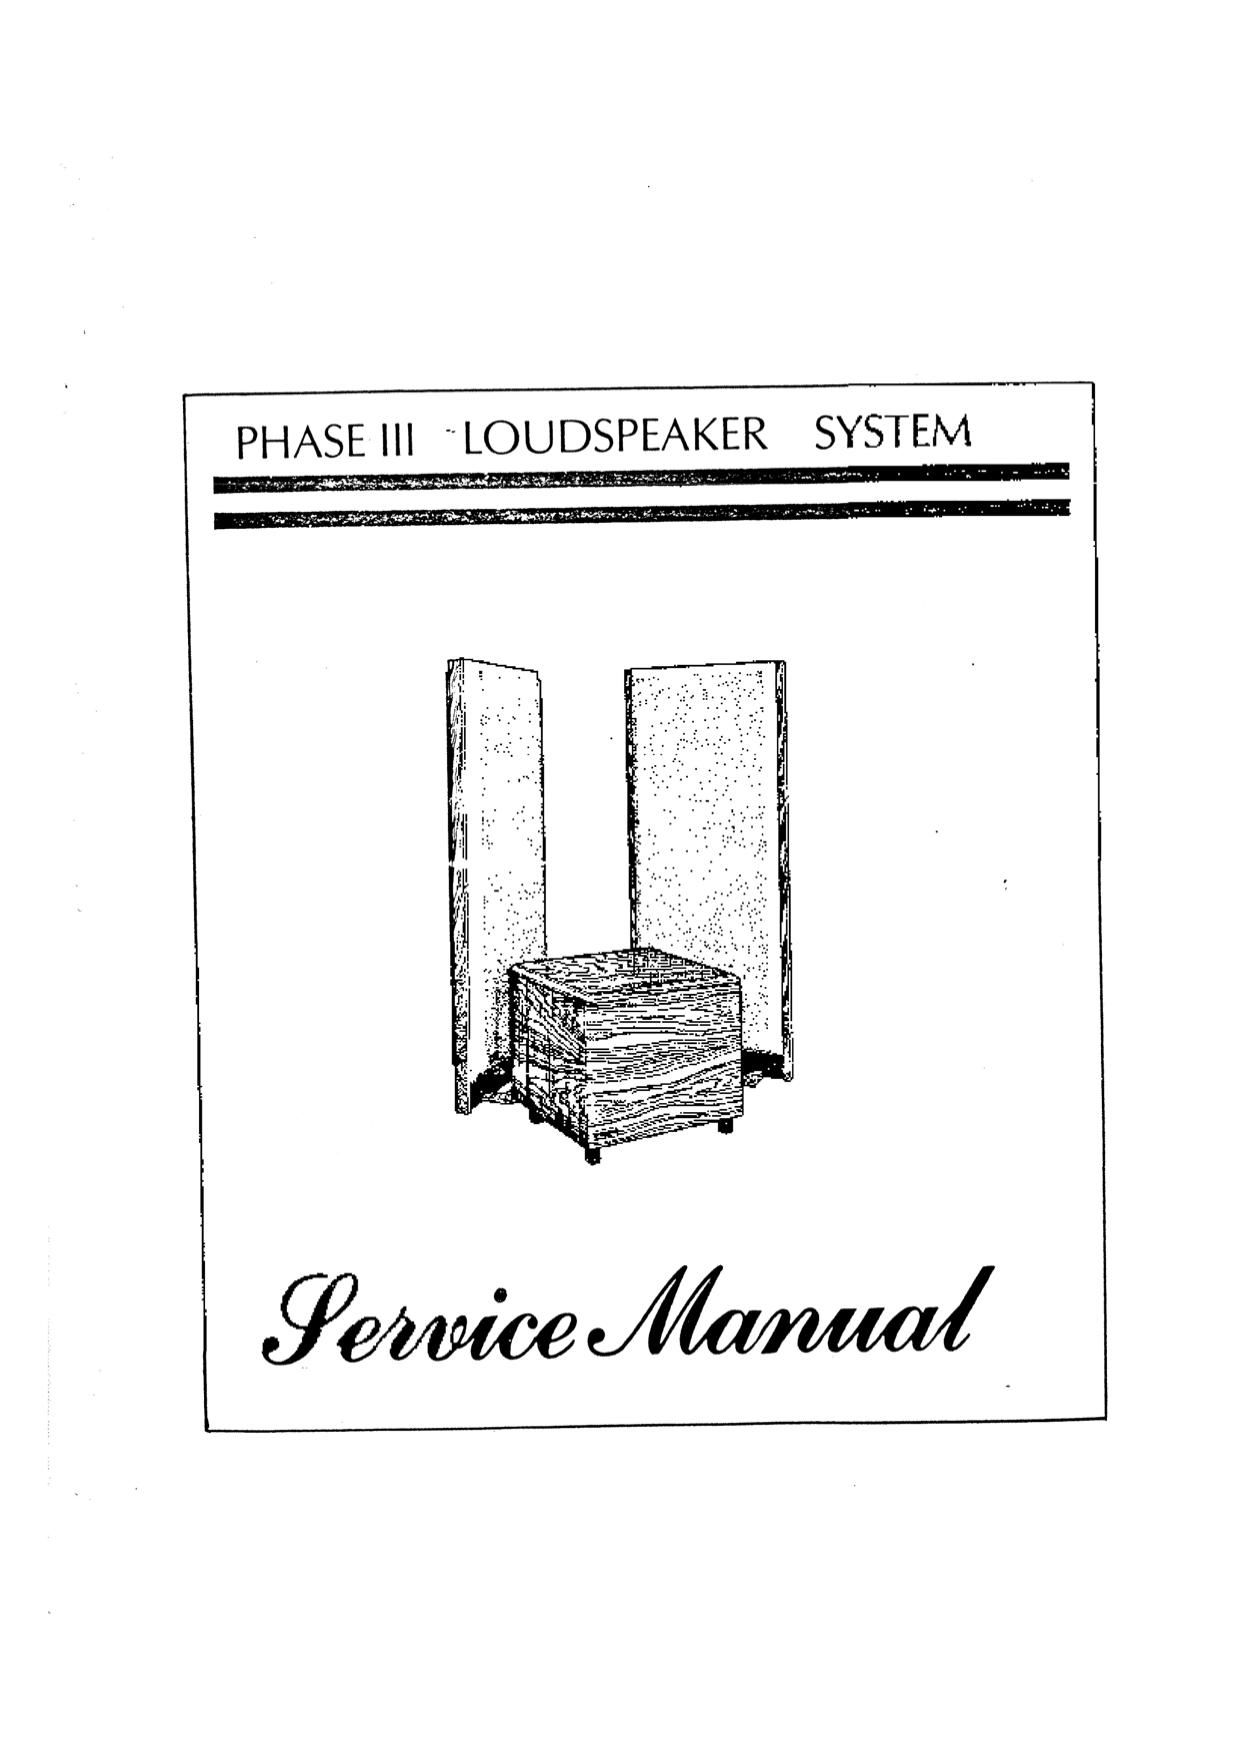 Phase Linear Phase III Service Manual